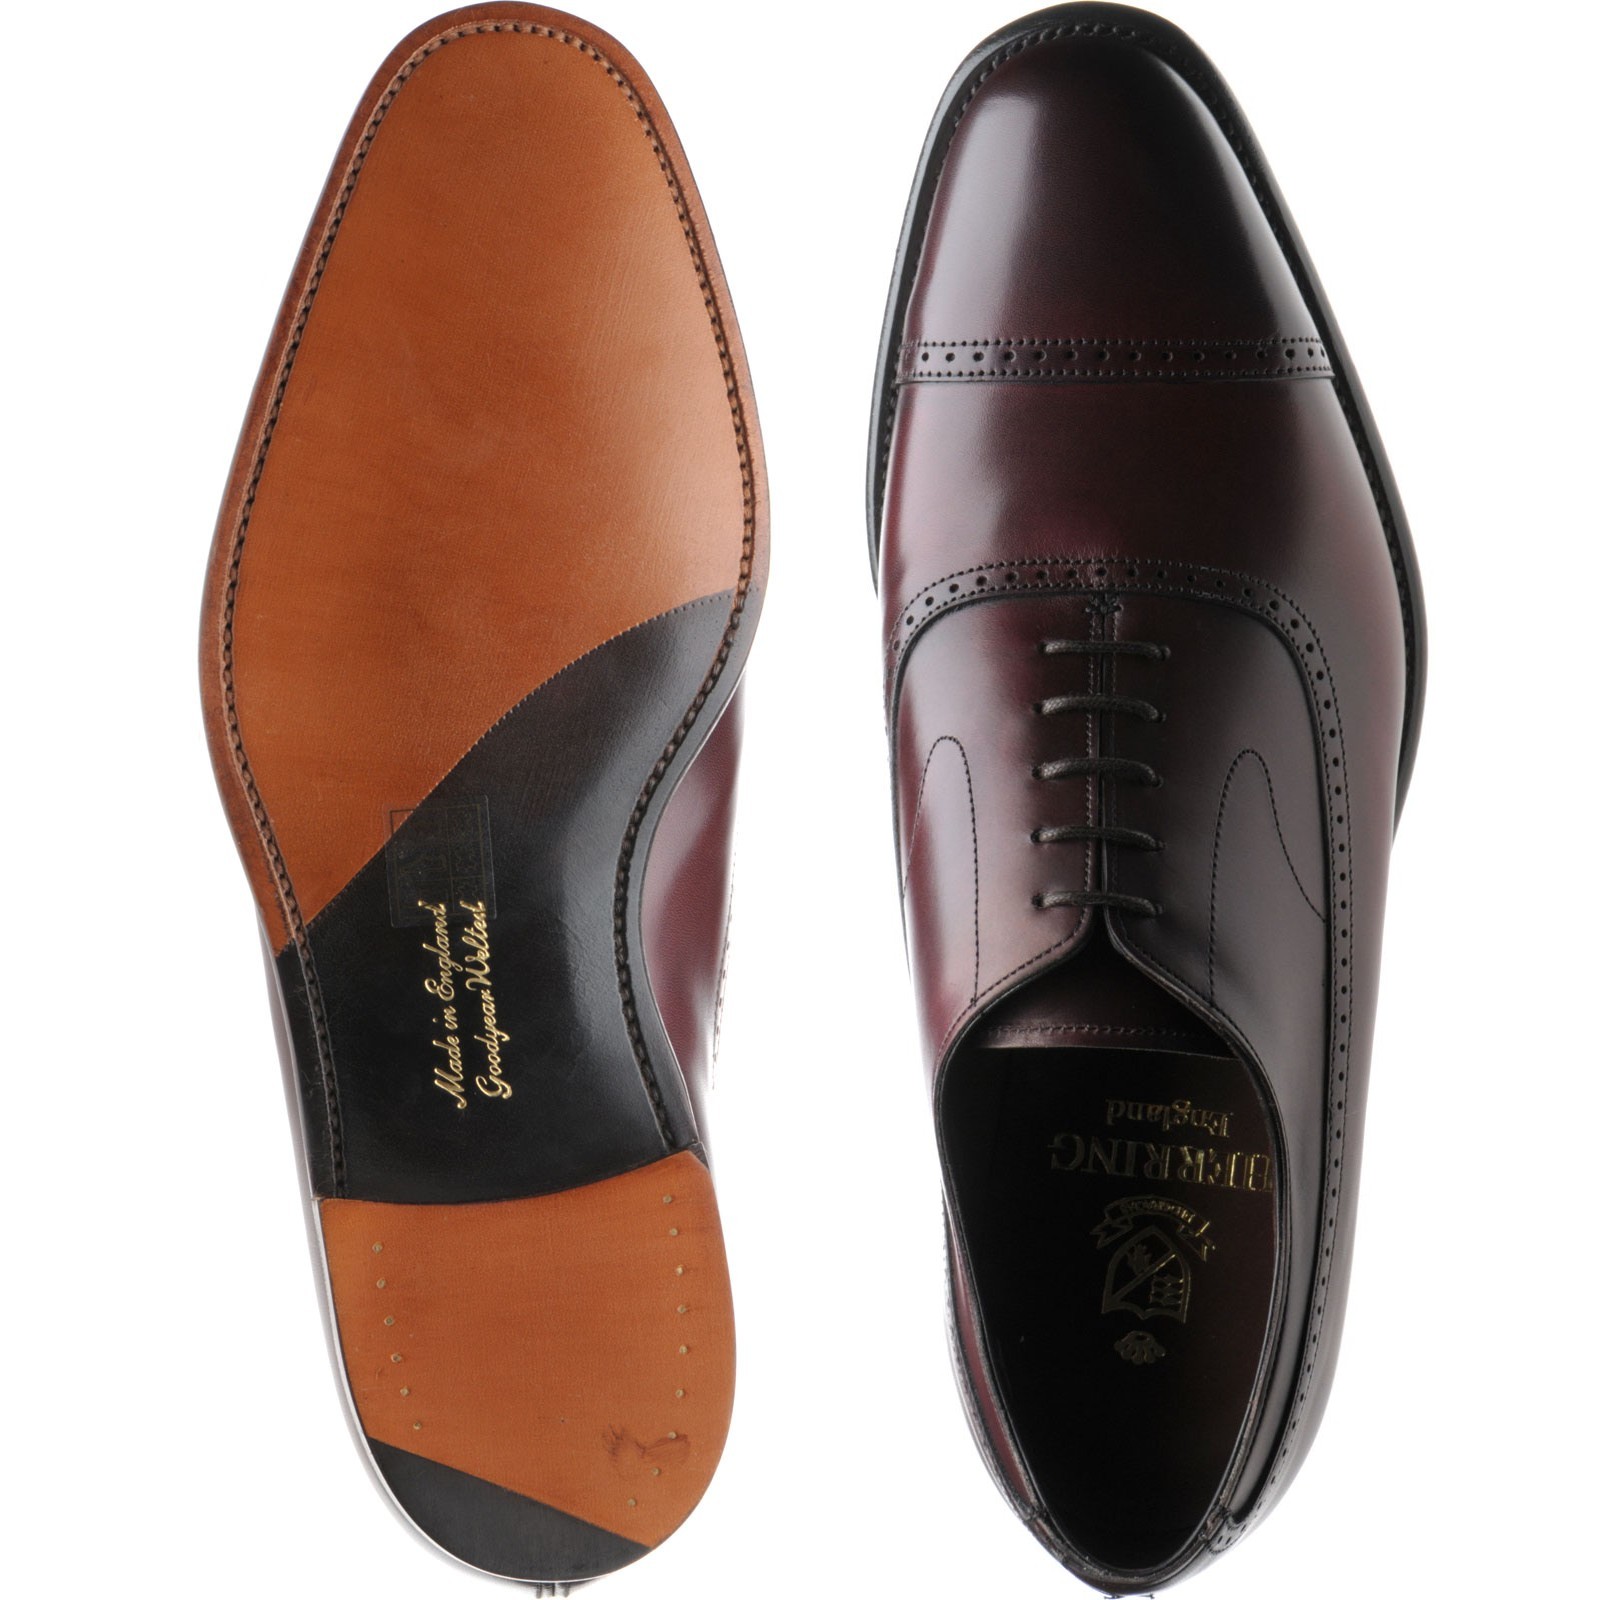 cheaney shoe sale